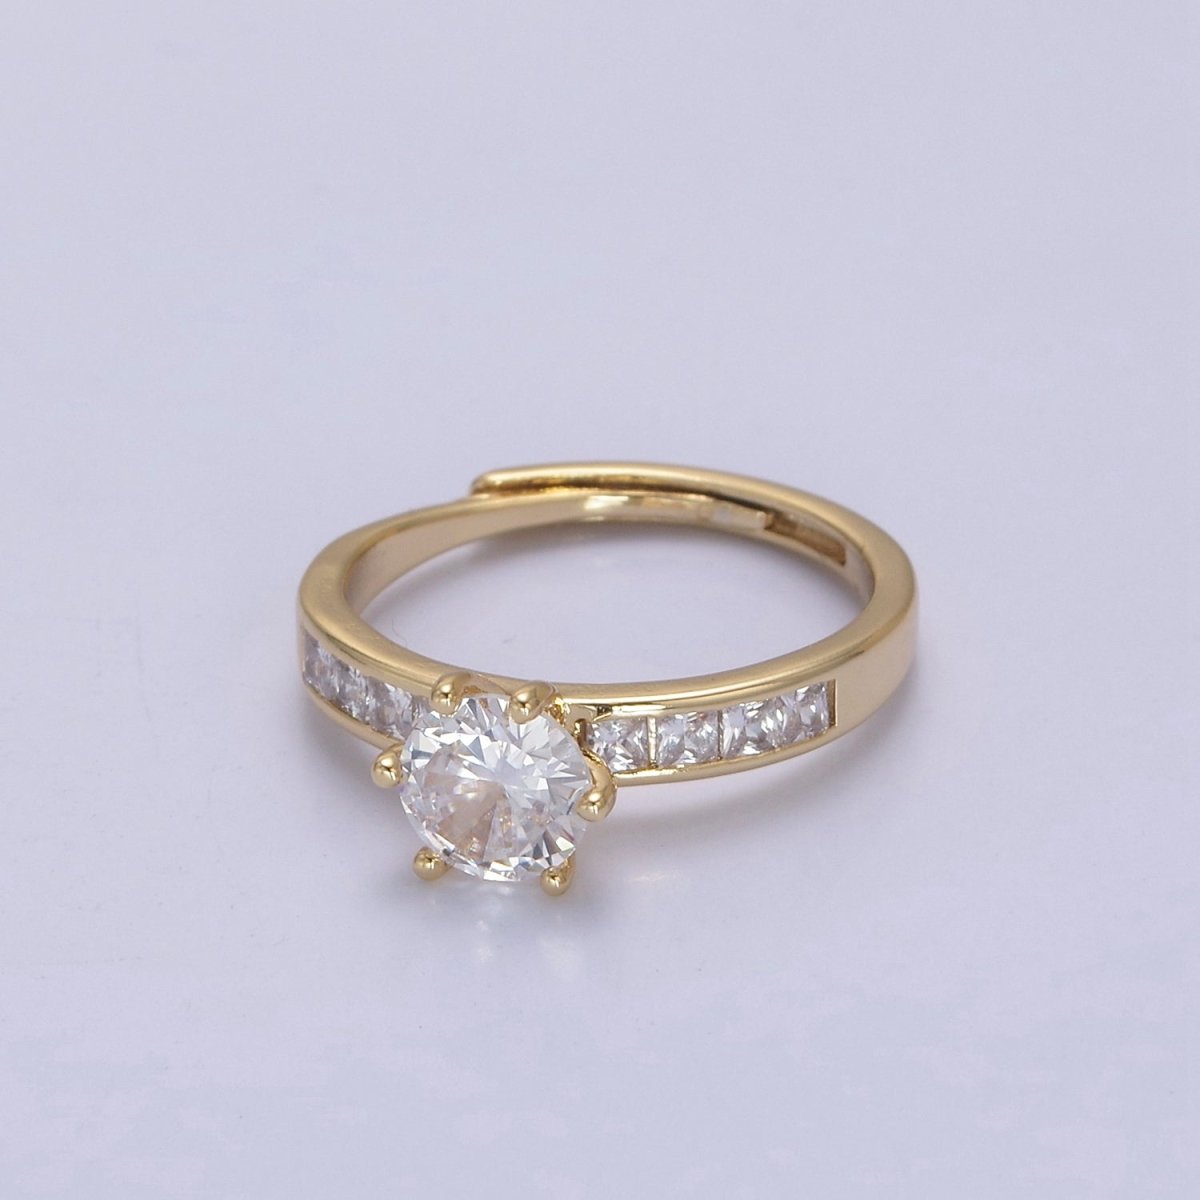 Gold solitaire ring for women with cubic zirconia stones engagement ring U-492 - DLUXCA